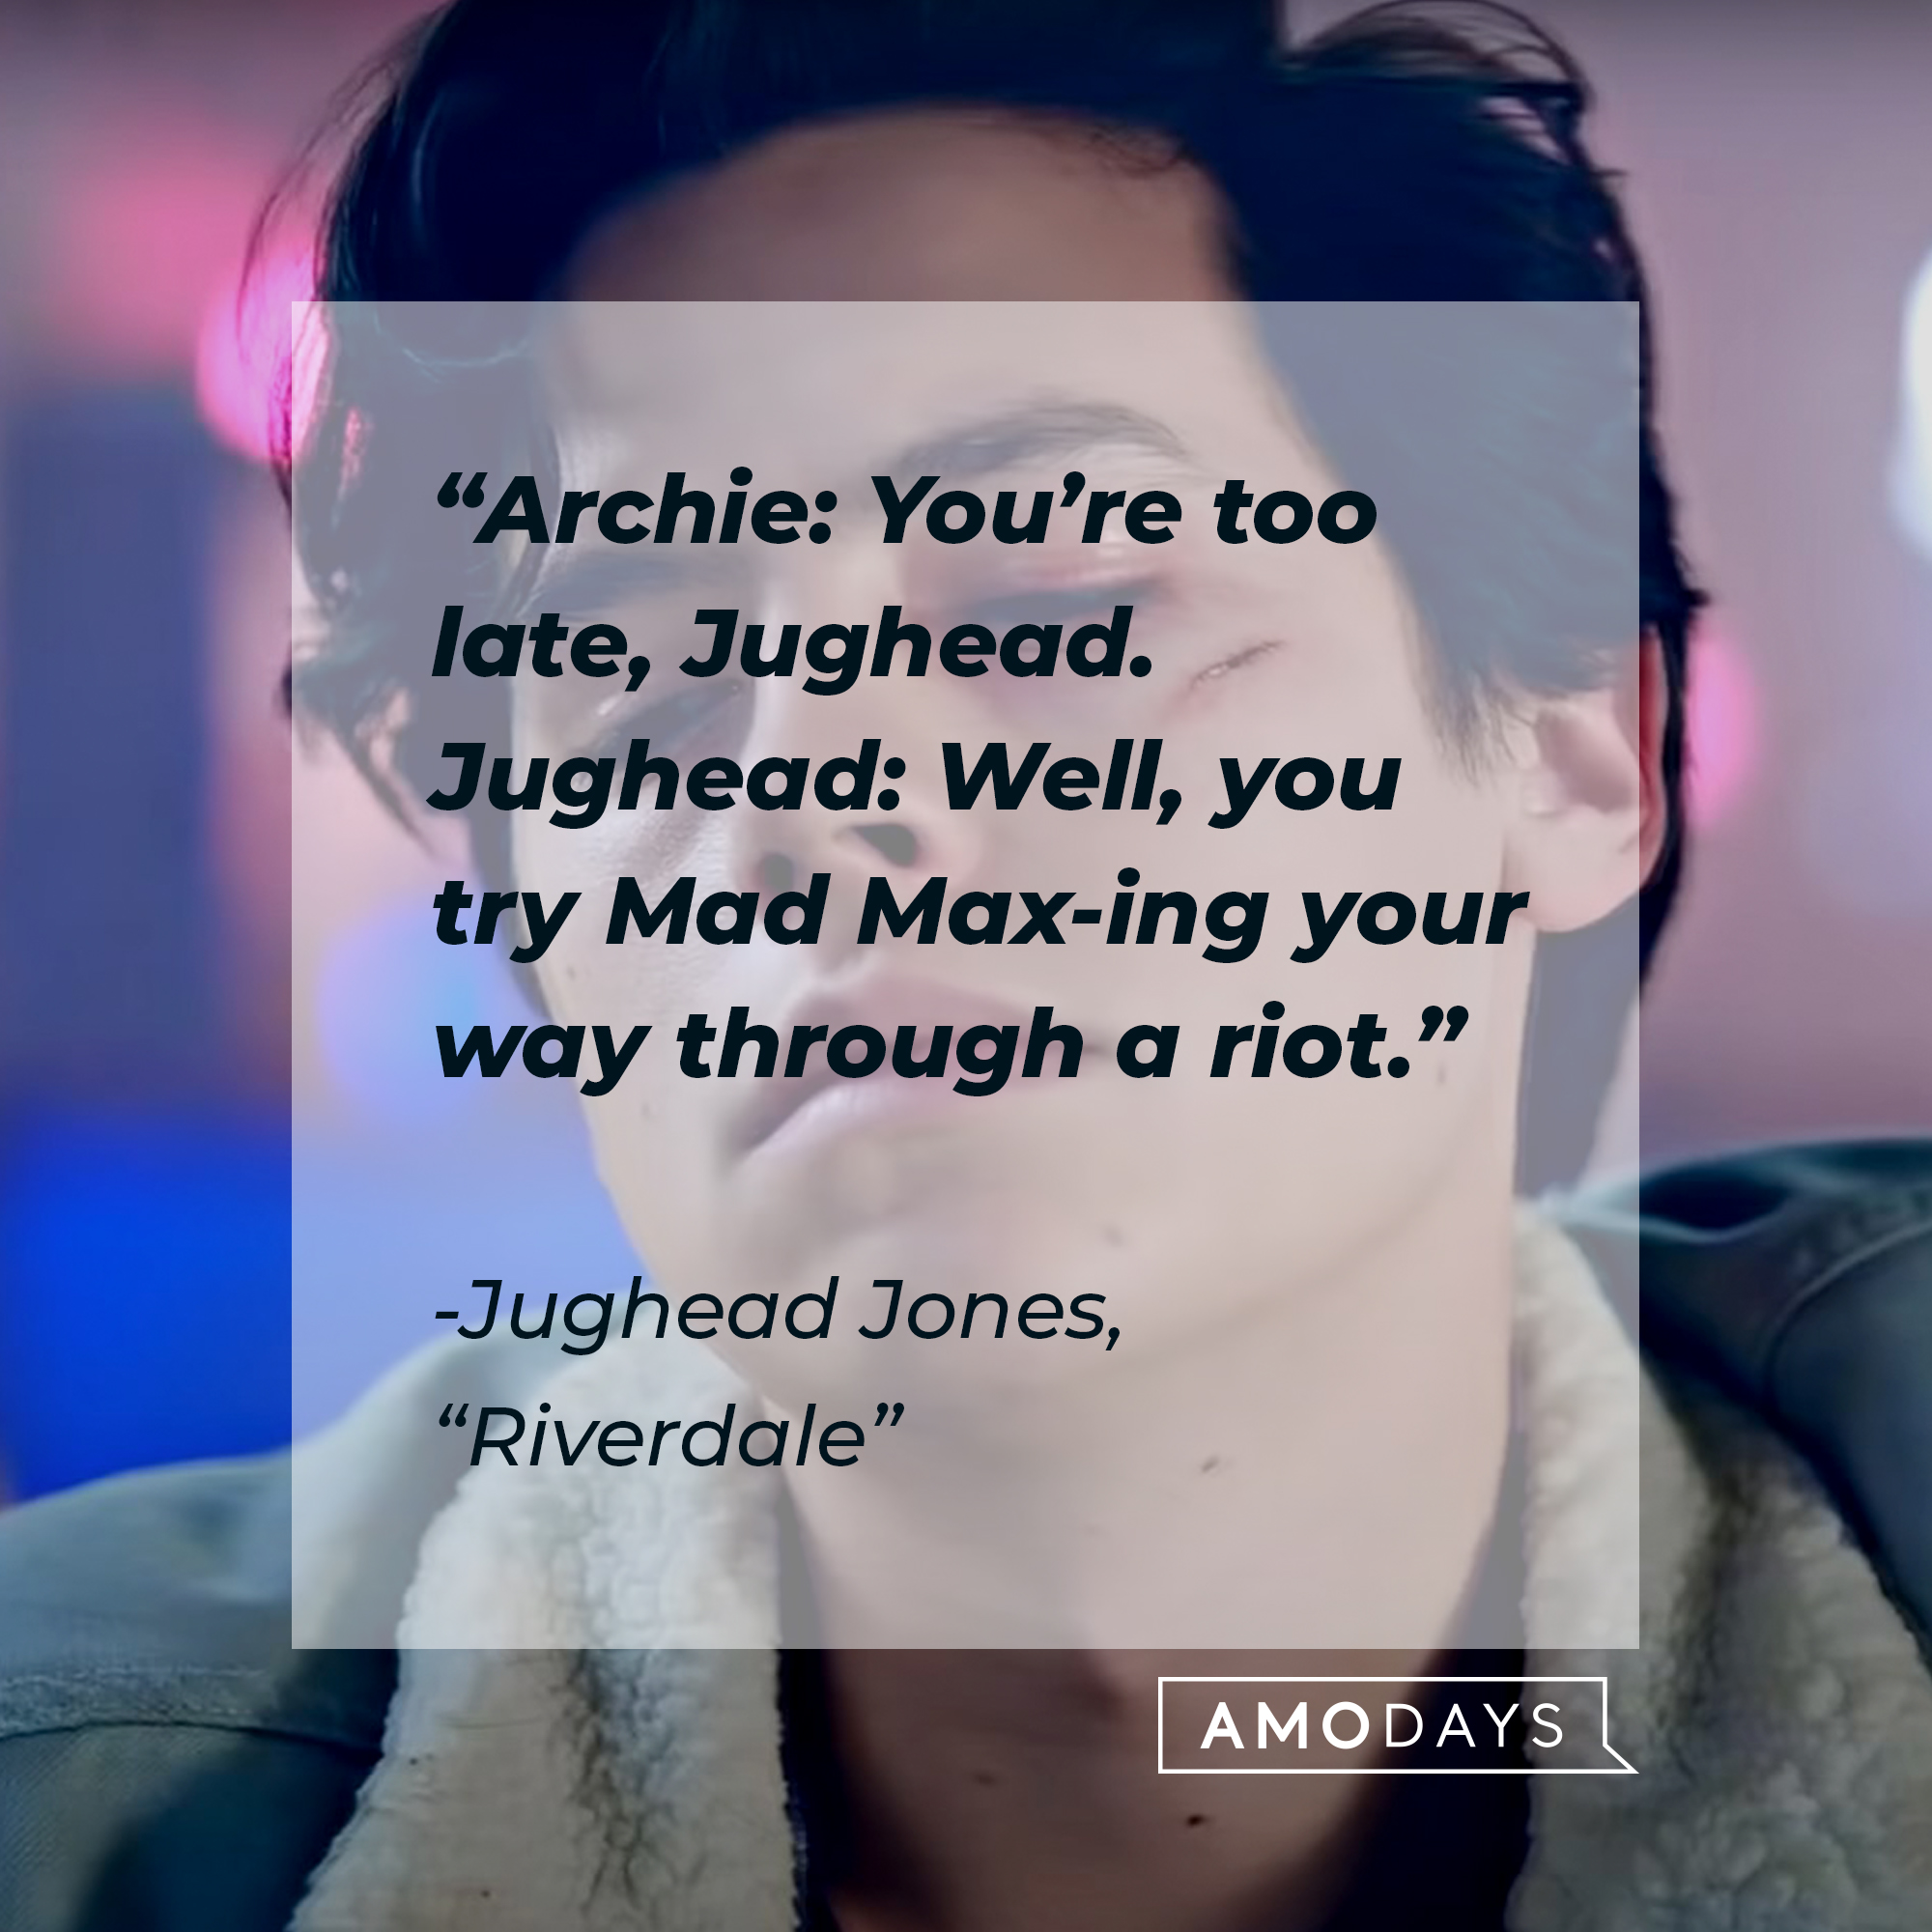 Image of Cole Sprouse as Judhead Jones in "Riverdale" with the dialogue: “Archie: You’re too late, Jughead. Jughead: Well, you try Mad Max-ing your way through a riot.” | Source: facebook.com/Riverdale